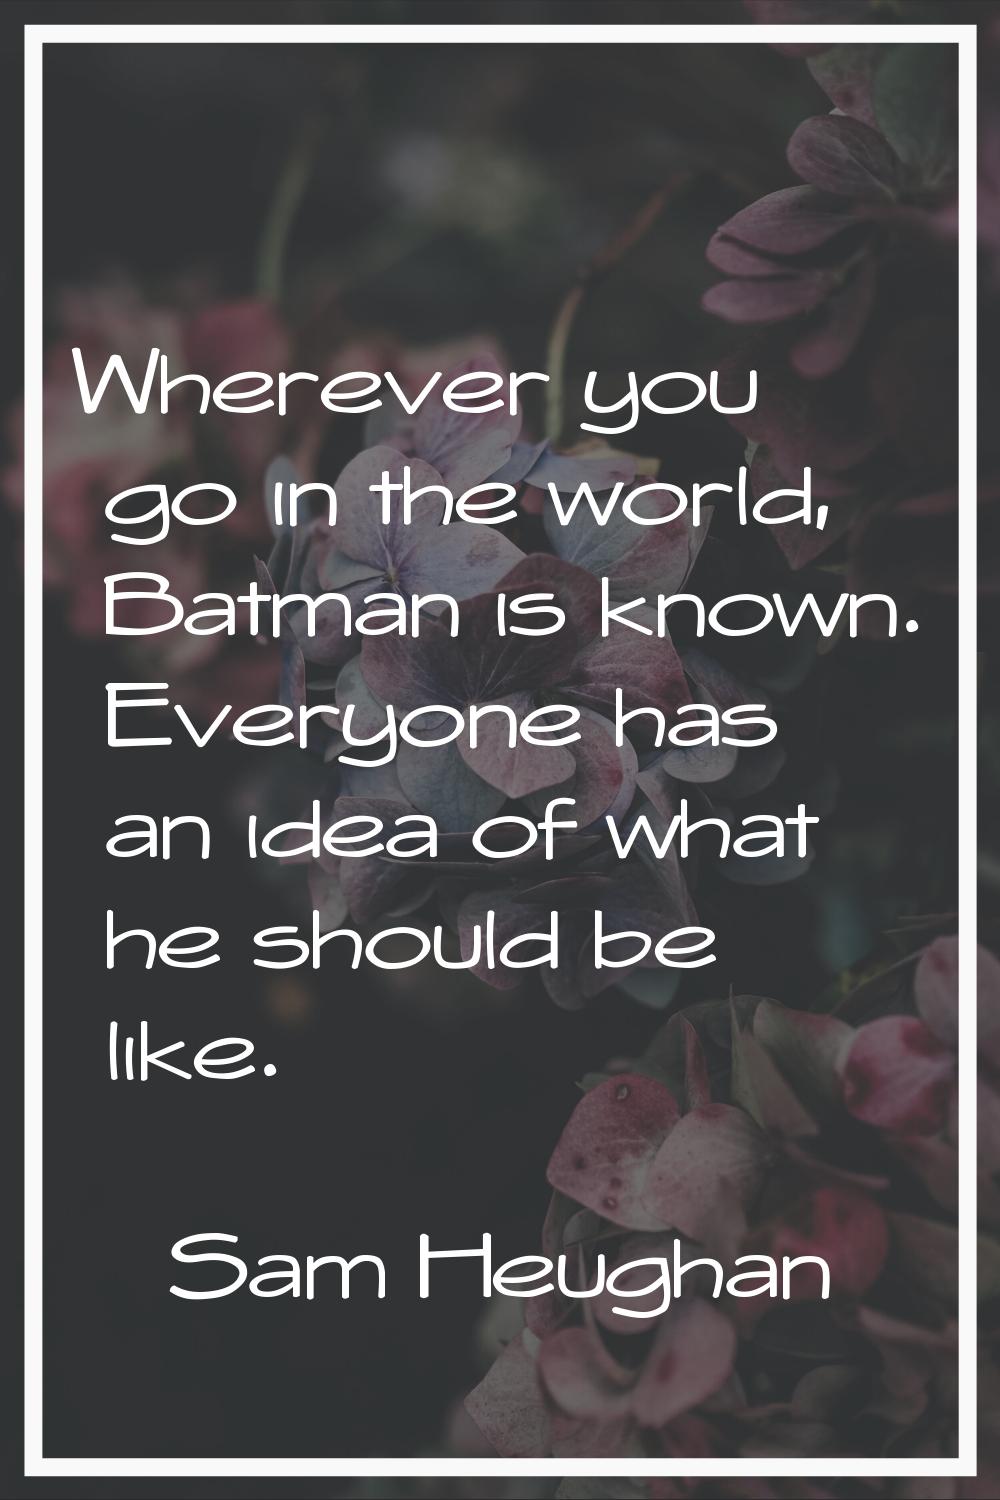 Wherever you go in the world, Batman is known. Everyone has an idea of what he should be like.